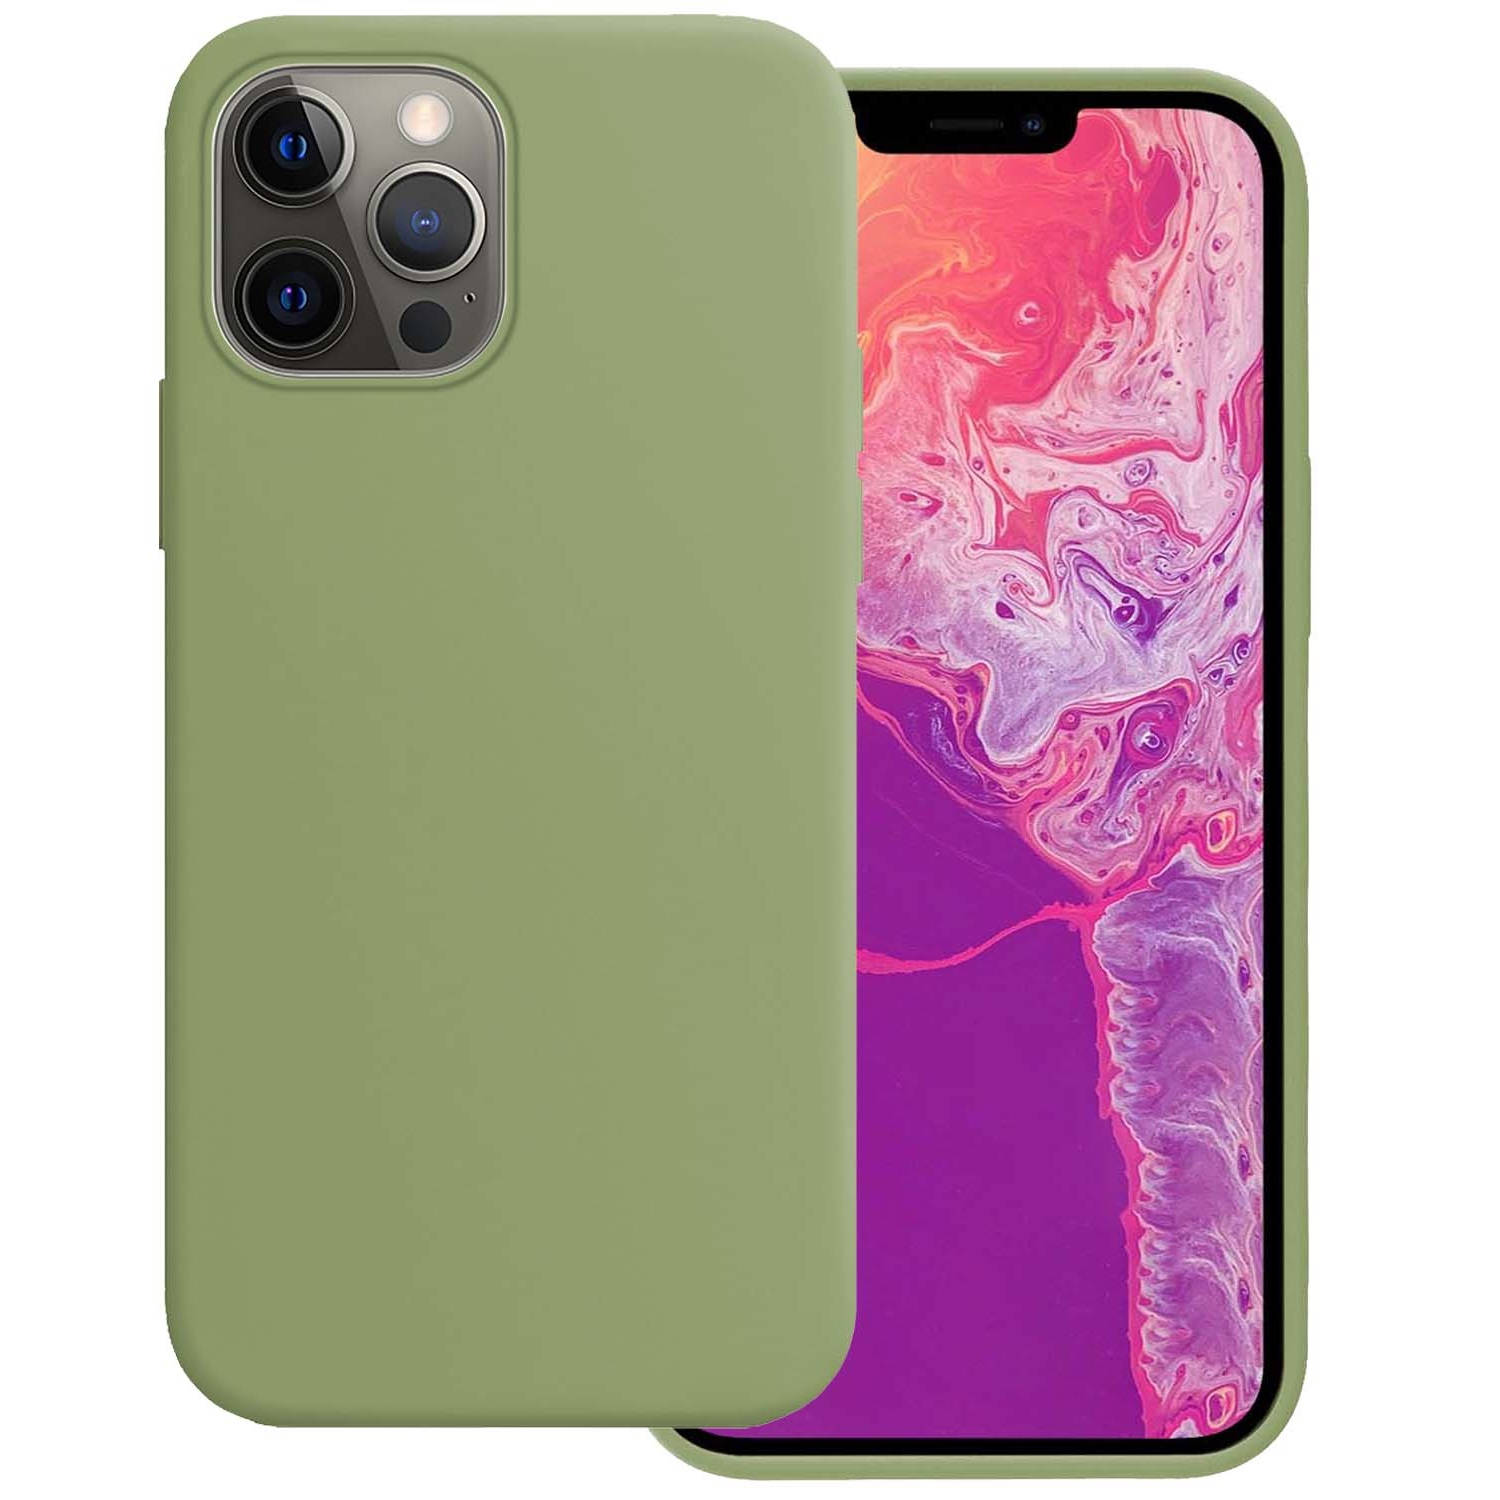 Basey Iphone 13 Pro Hoesje Silicone Case Iphone 13 Pro Case Groen Siliconen Hoes Iphone 13 Pro Hoes 